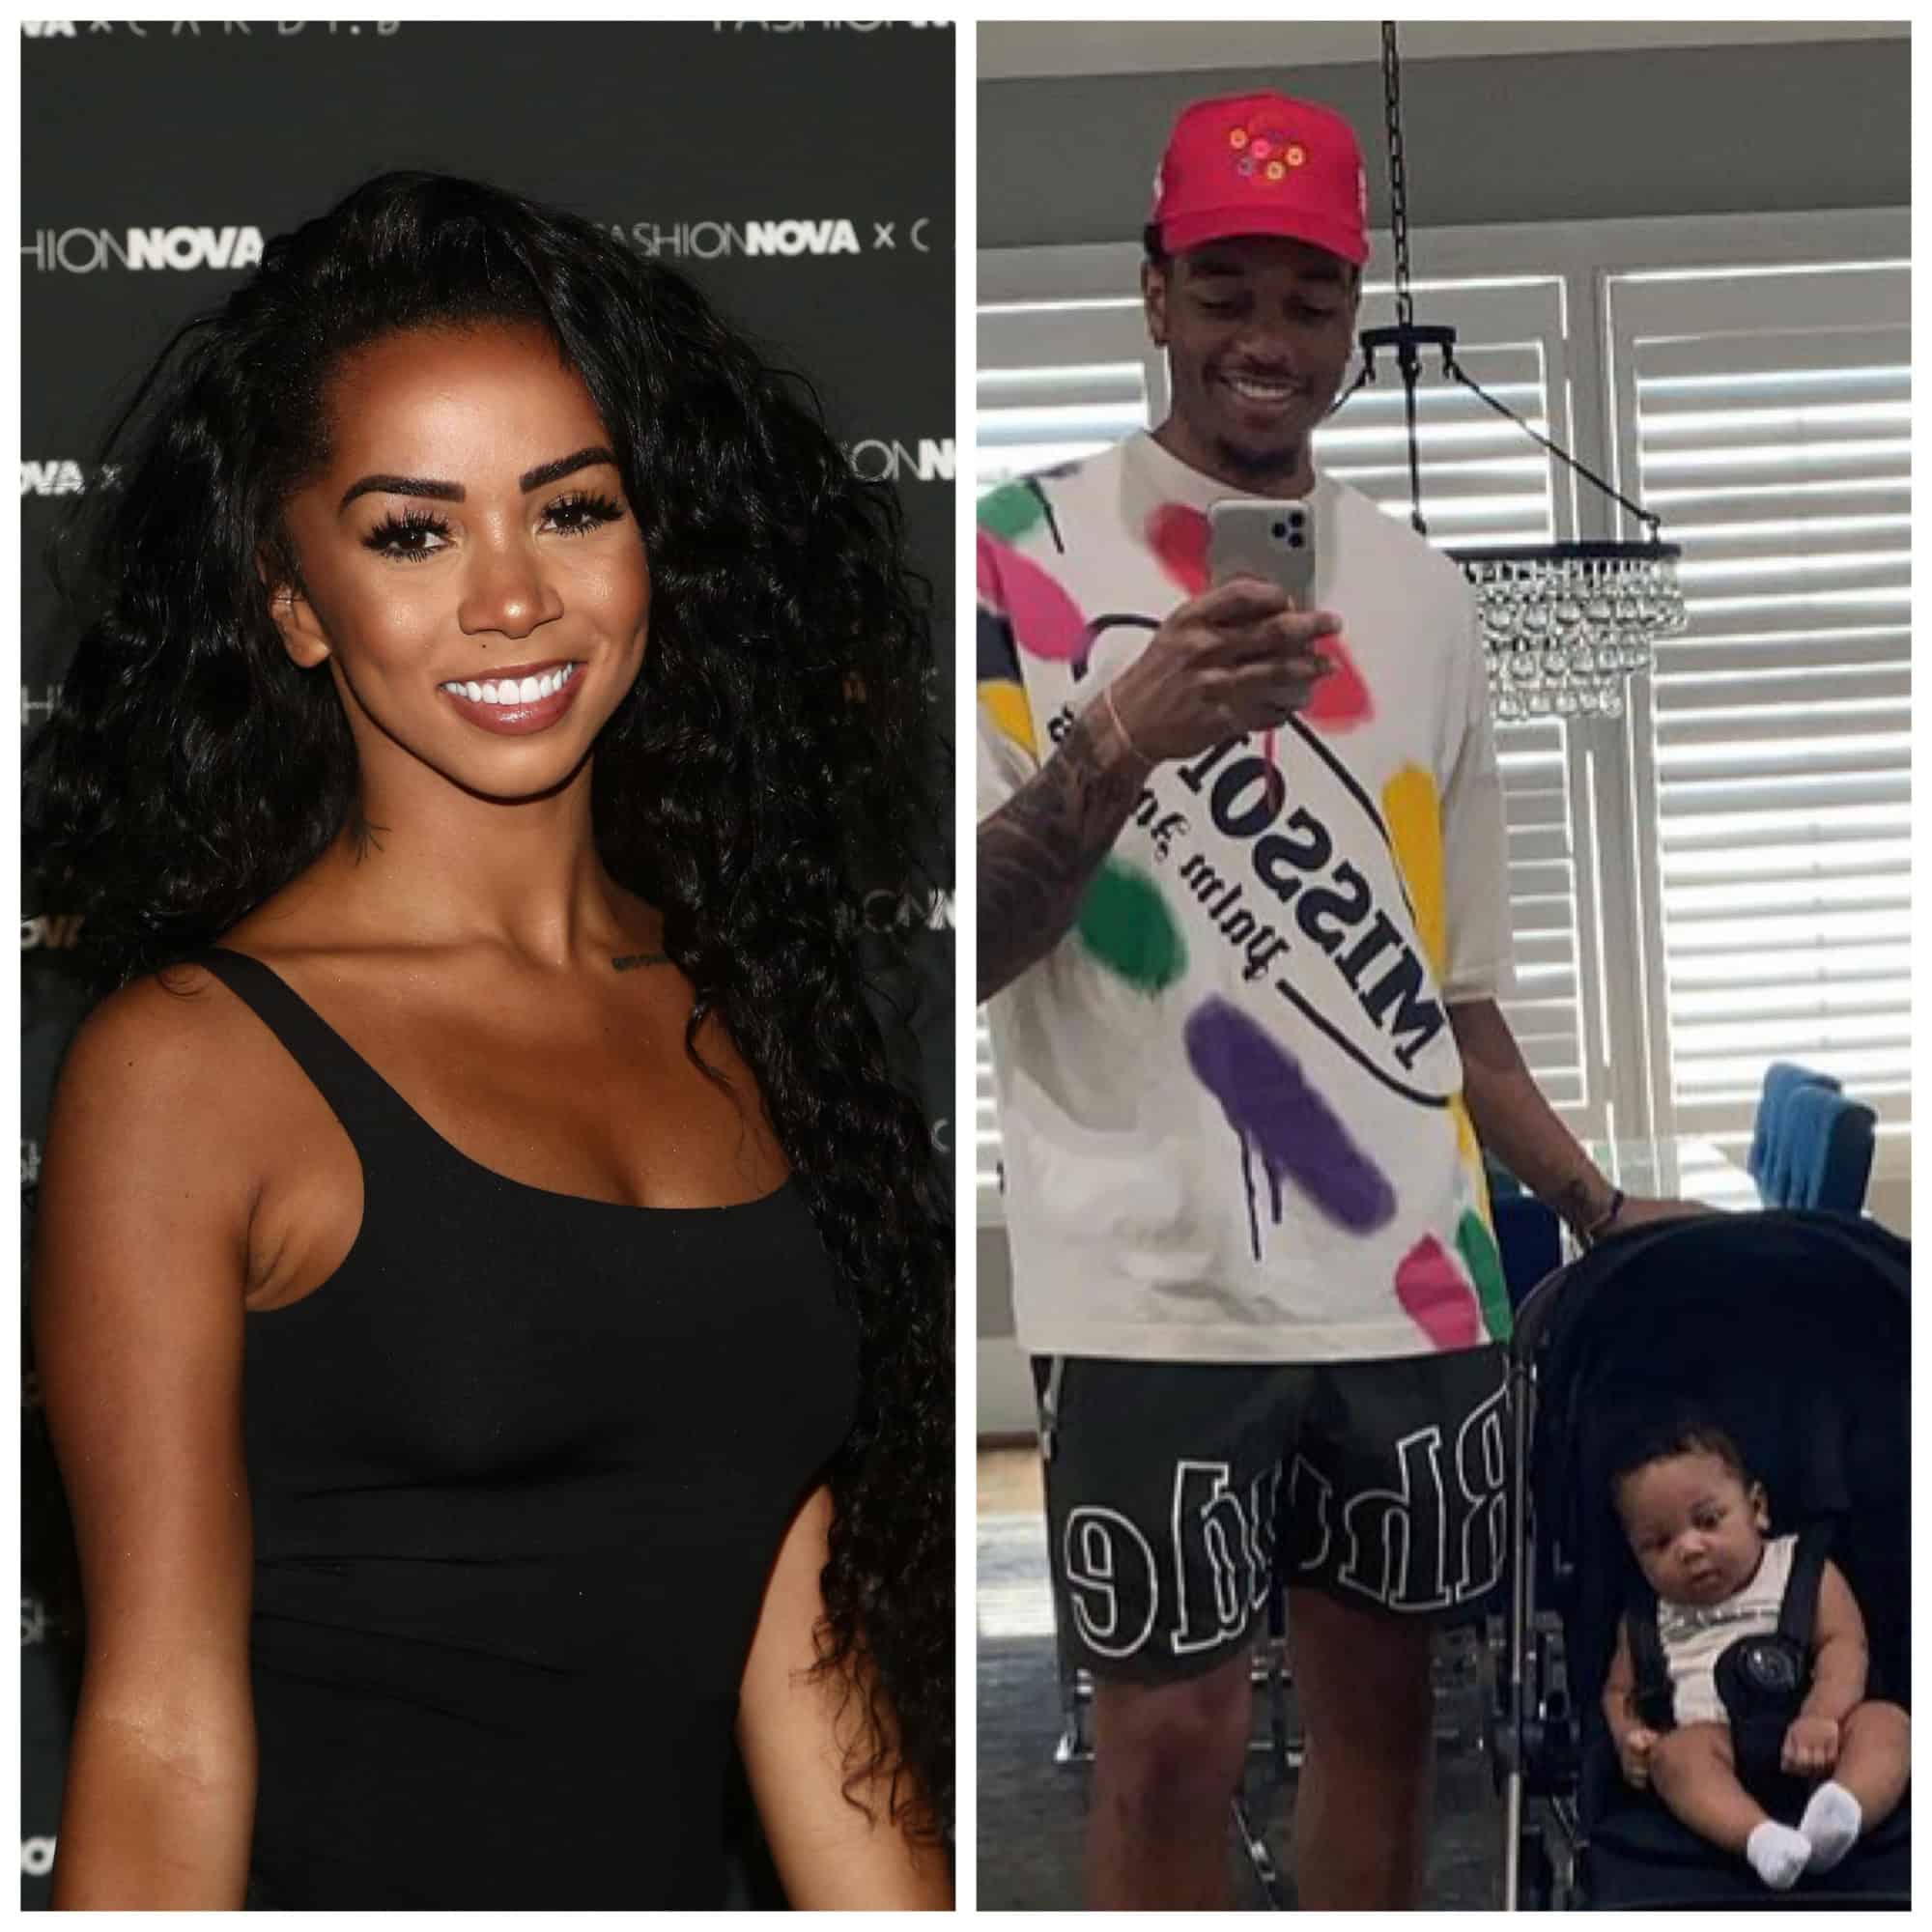 IG Model Brittany Renner trends for a resurfaced clip in which she tells women to sleep with athletes because they are "really dumb."